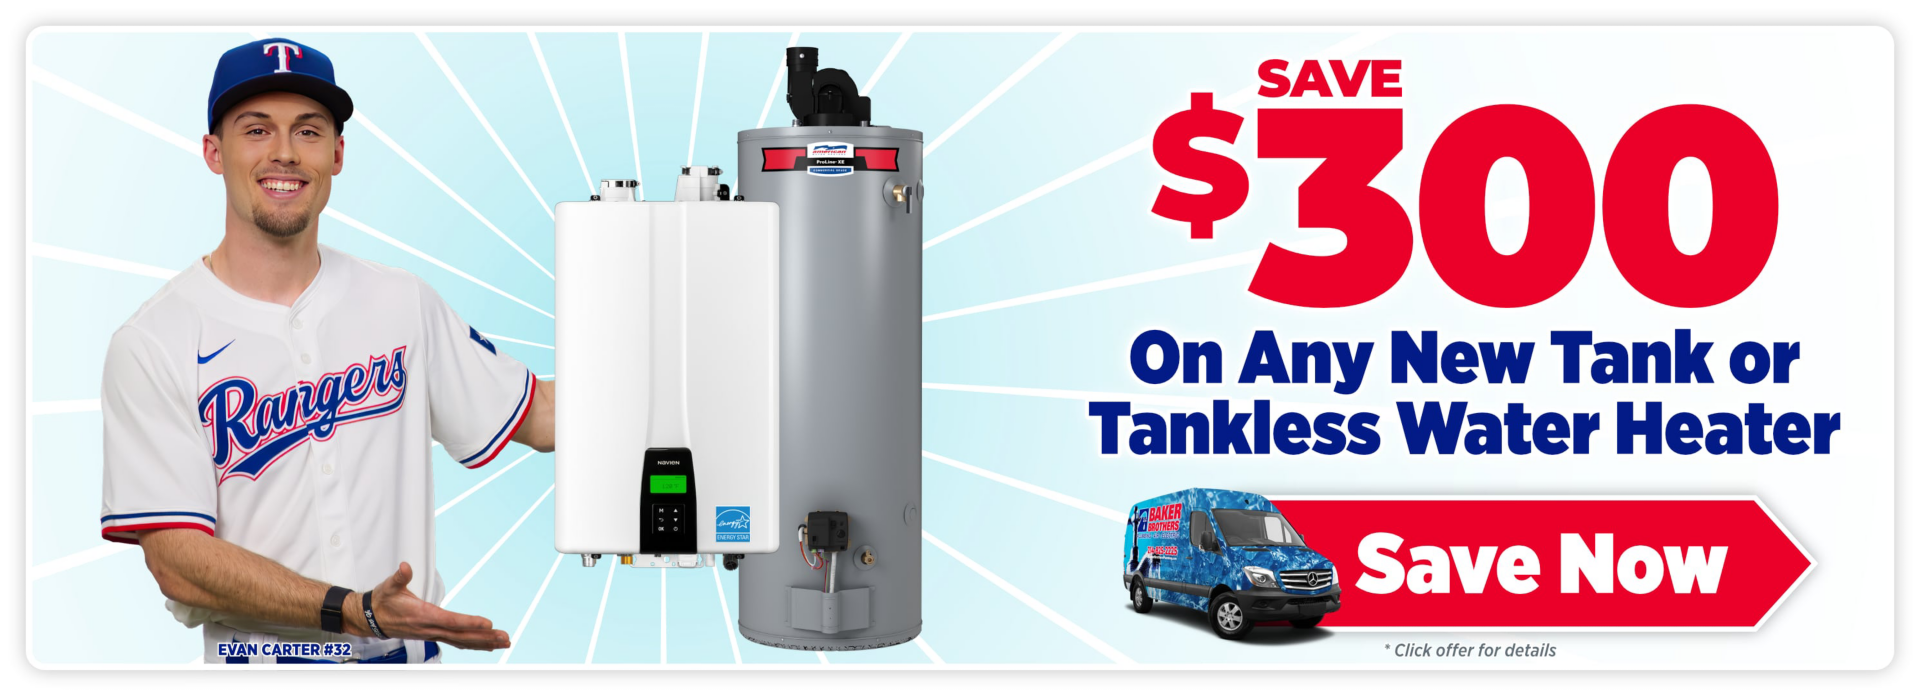 Save $300 on any new Water Heater